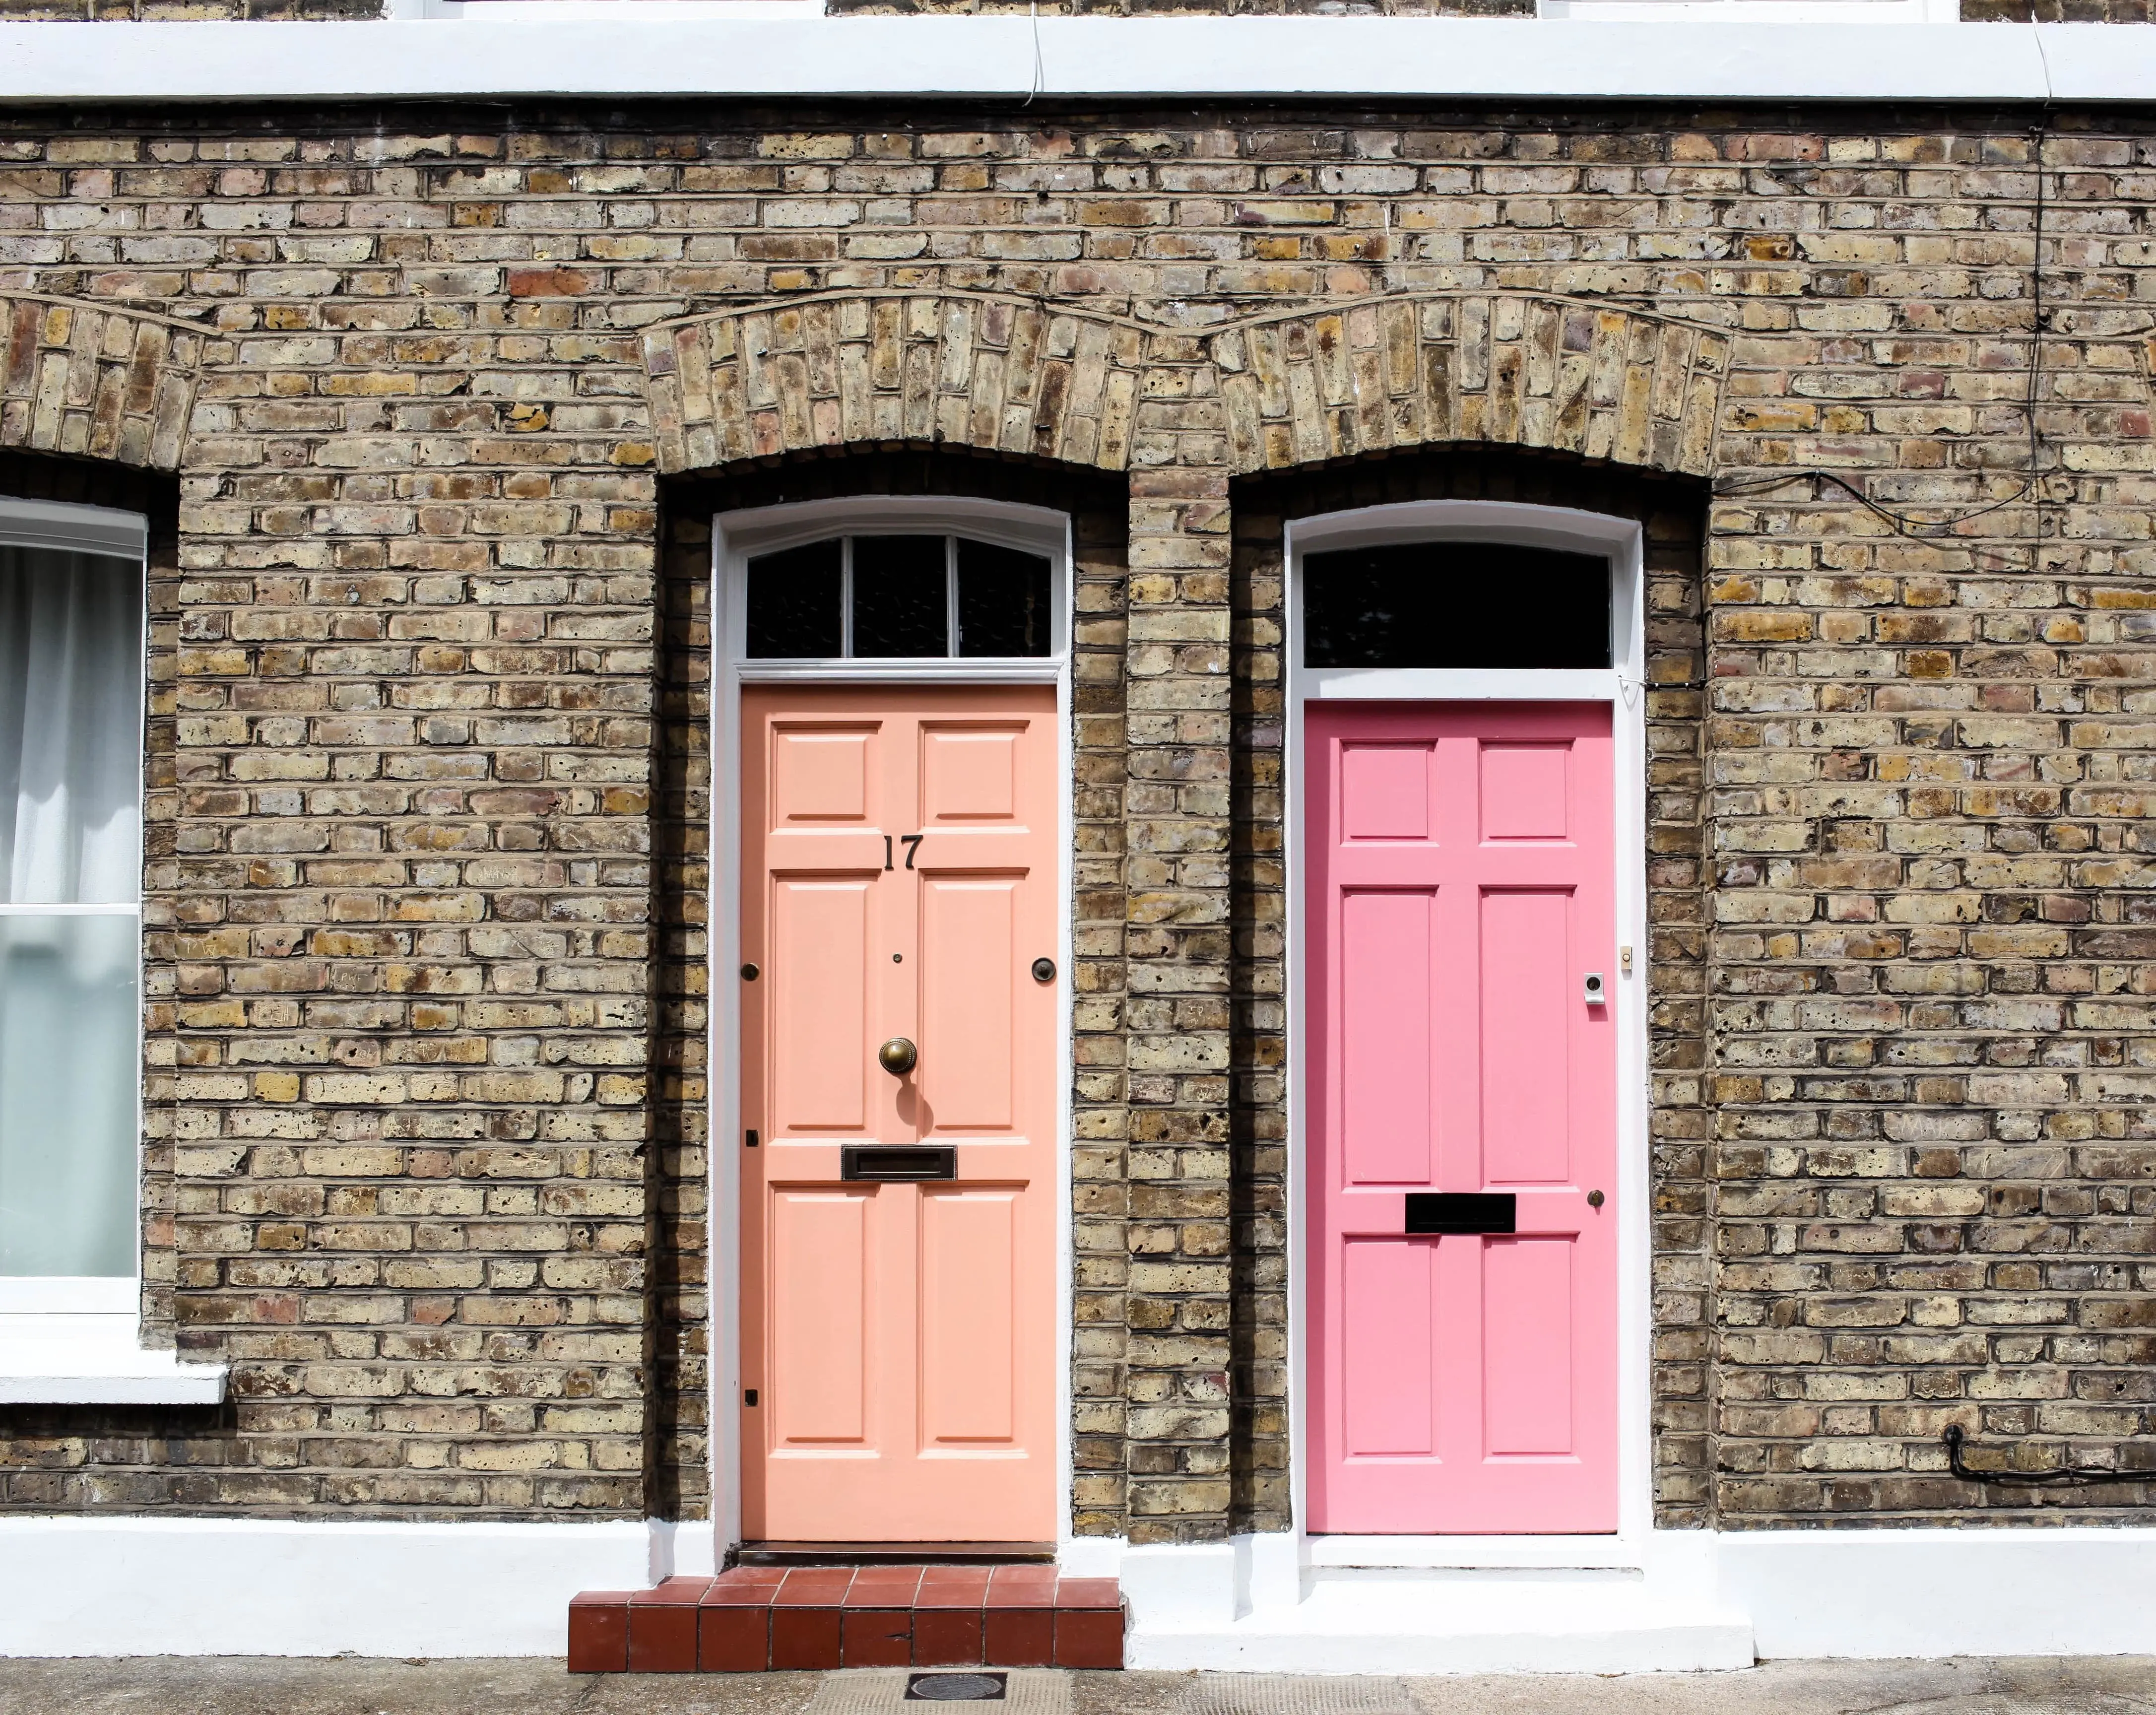 Two brightly coloured doors scaled